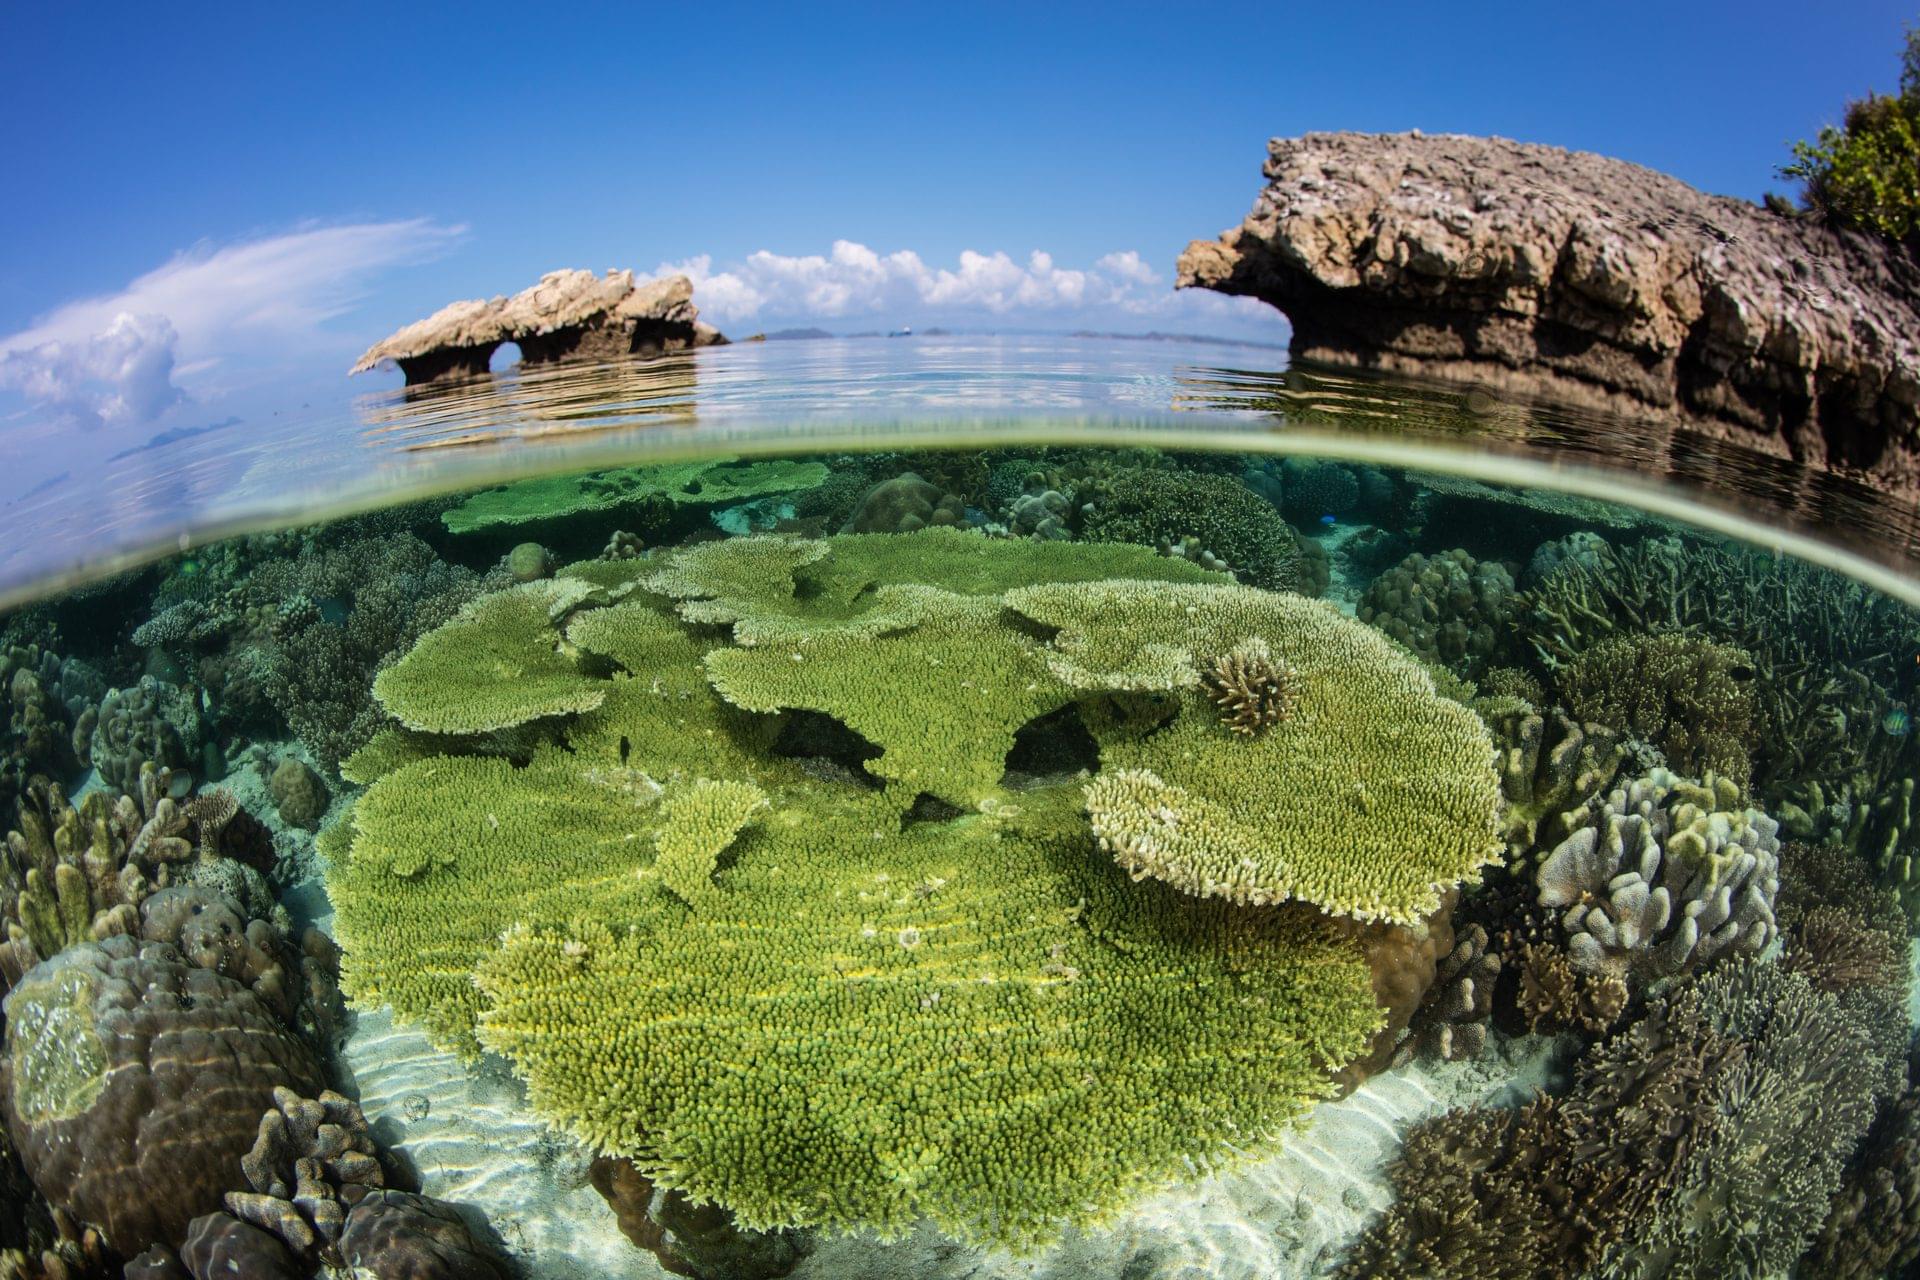 A coral reef in Indonesia